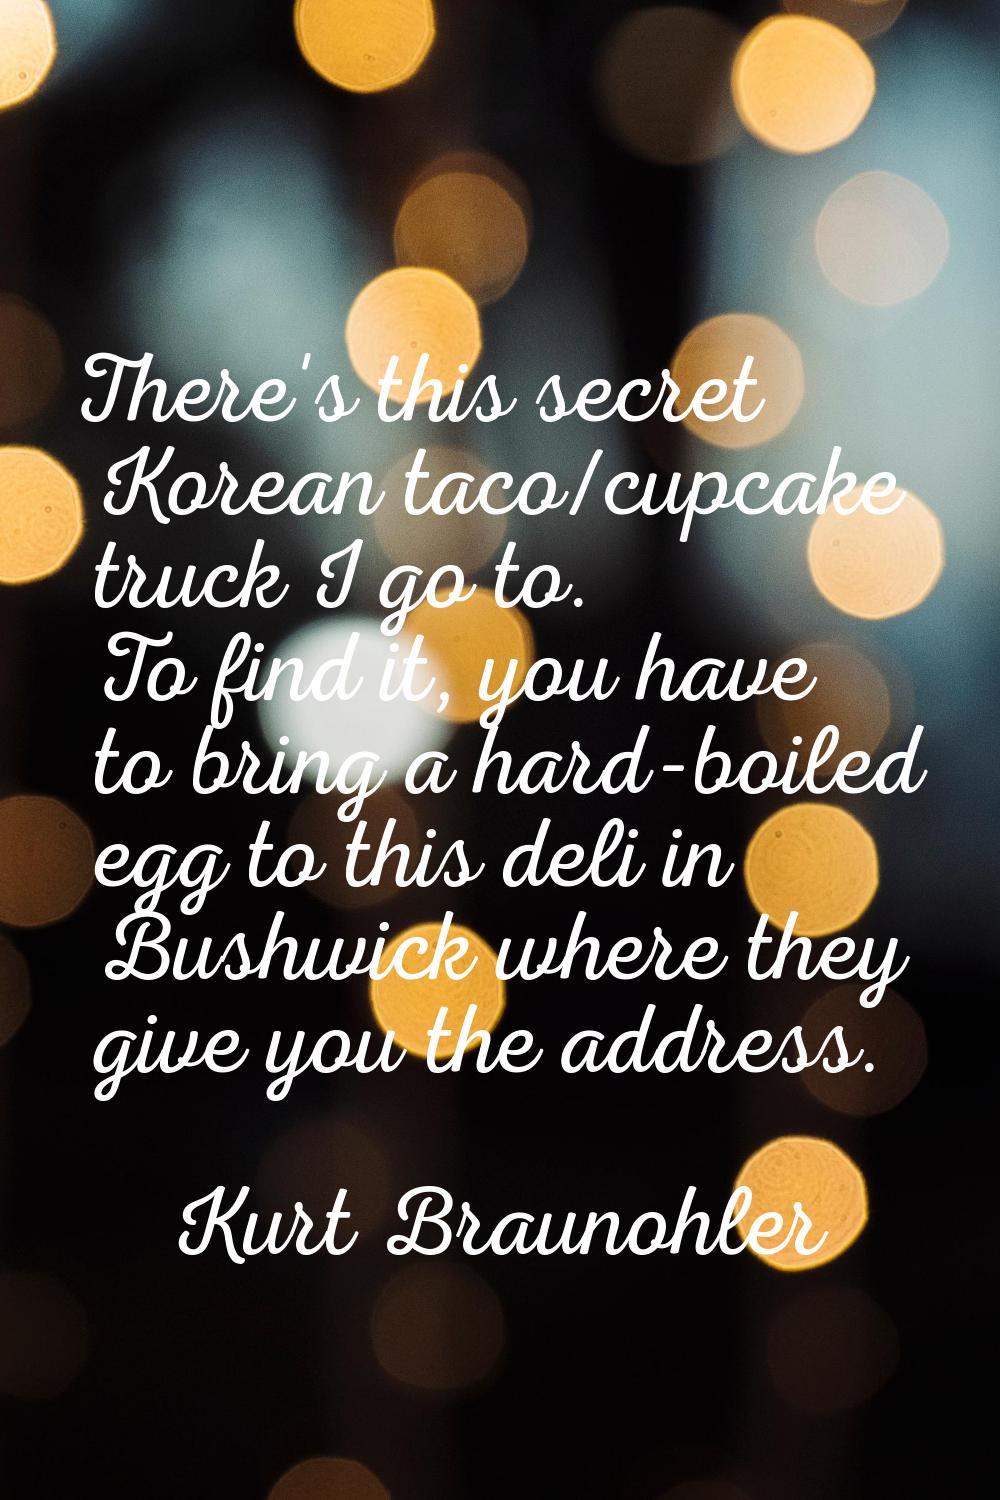 There's this secret Korean taco/cupcake truck I go to. To find it, you have to bring a hard-boiled 